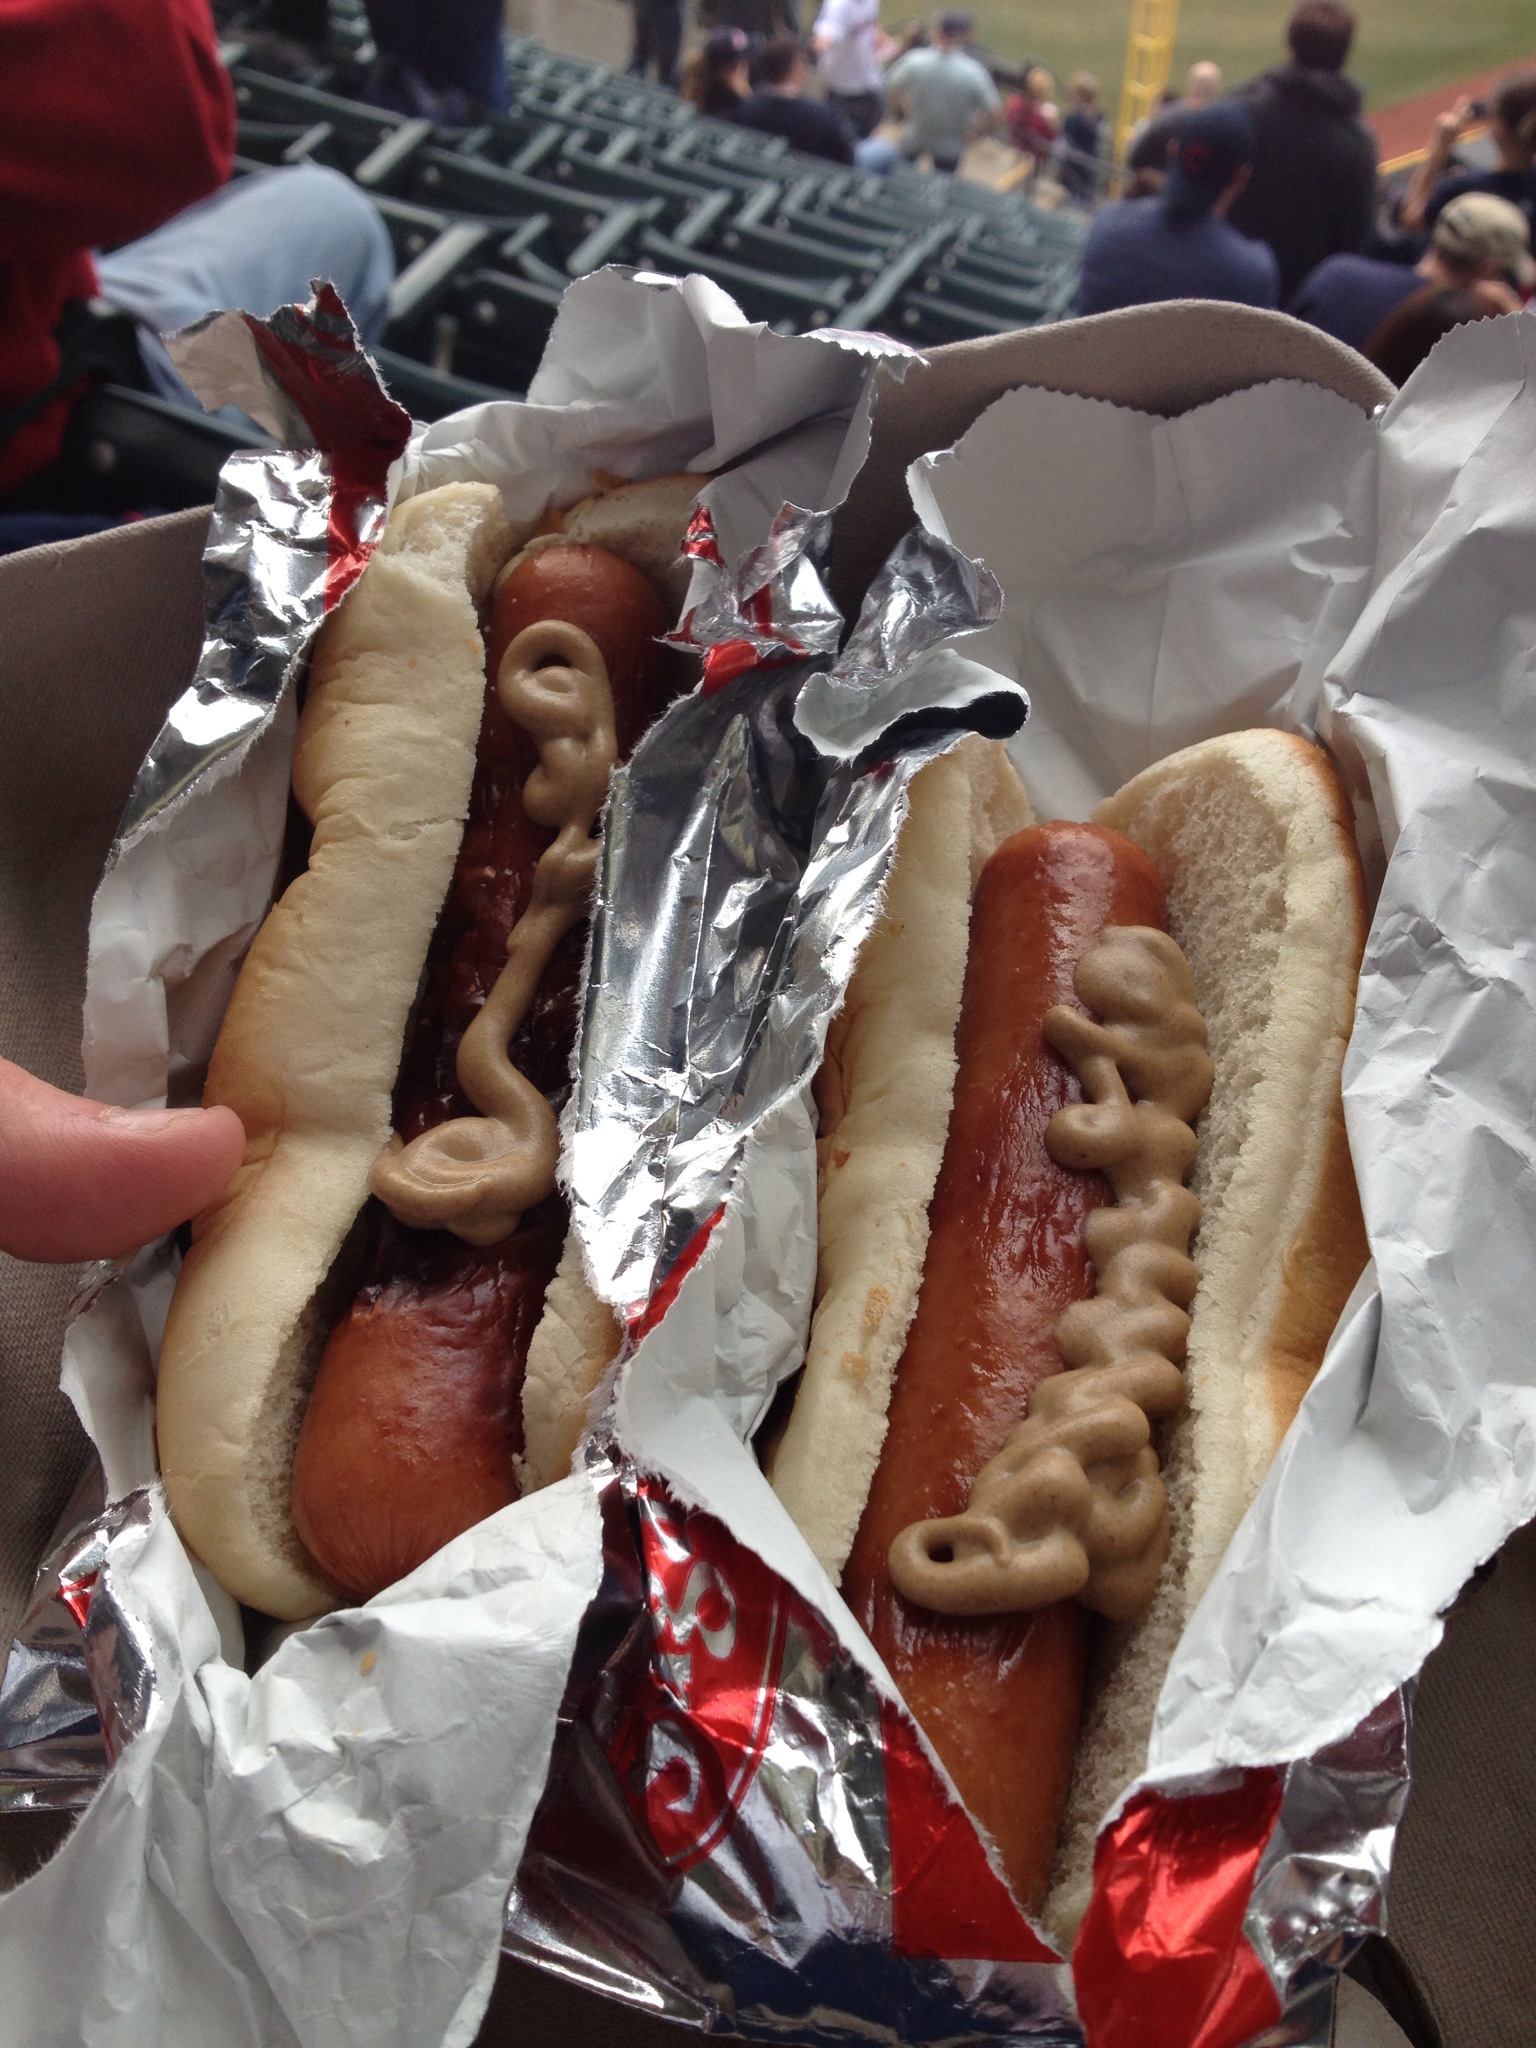 Hot Dogs At The Ballpark